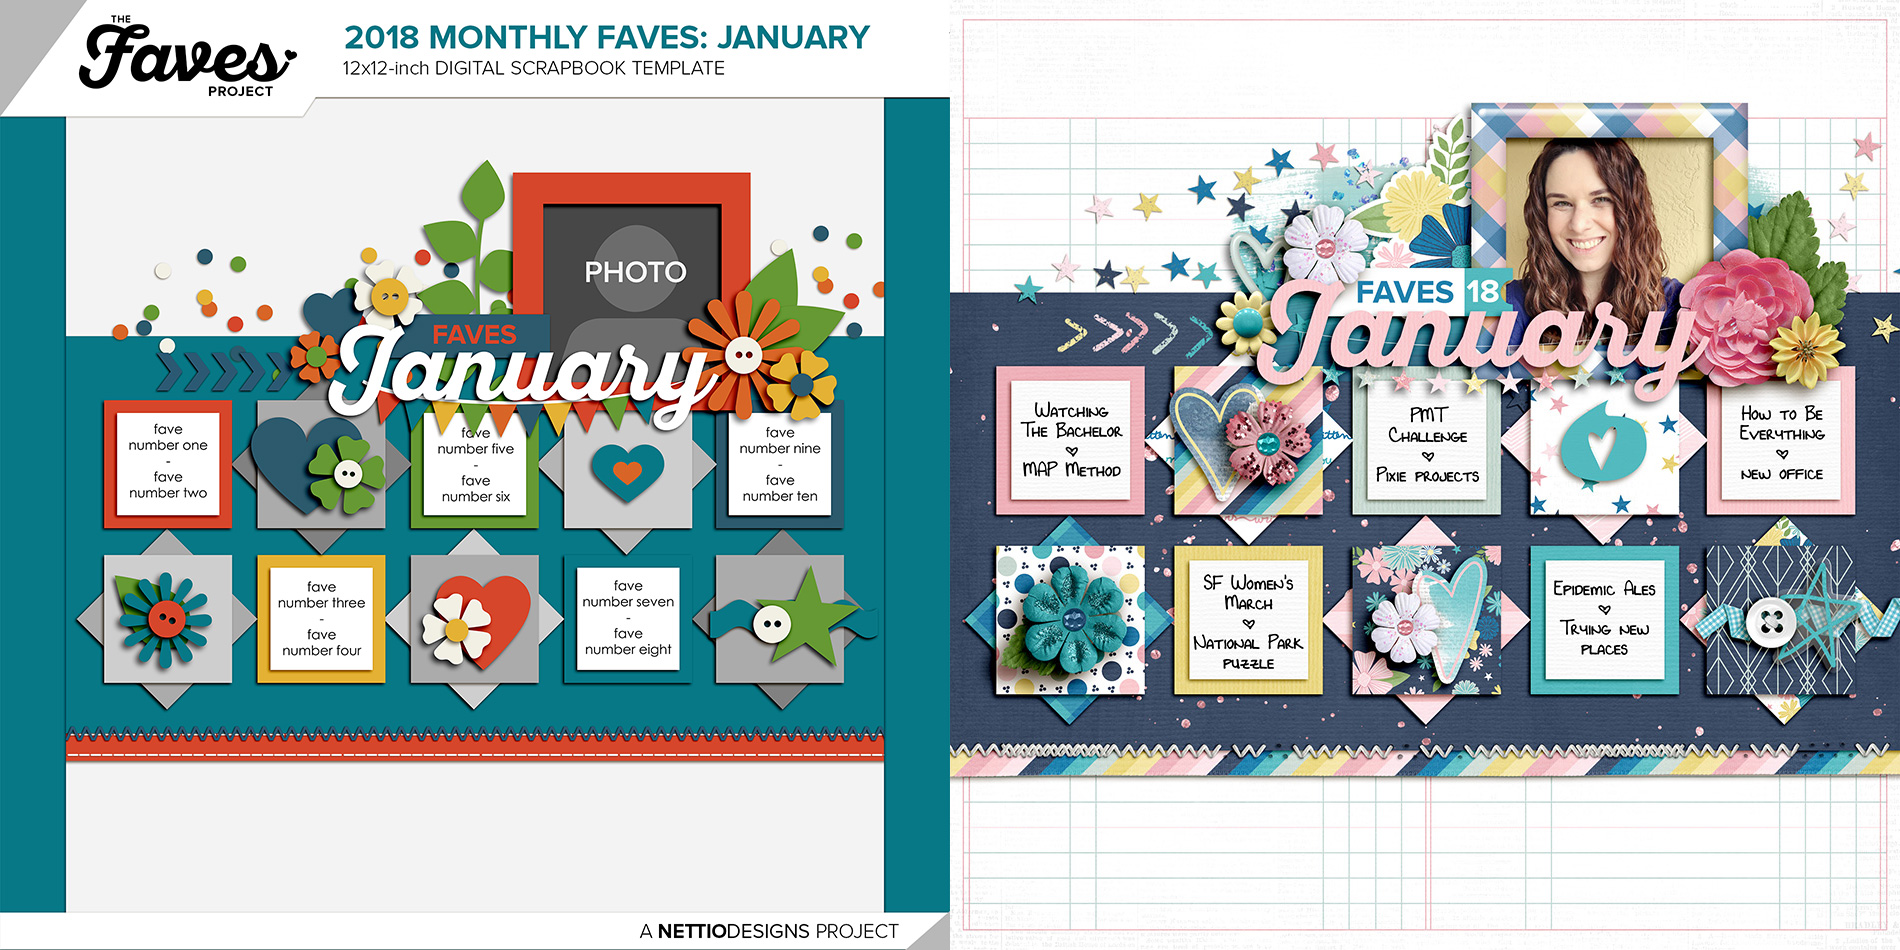 2018 Monthly Faves Project | NettioDesigns